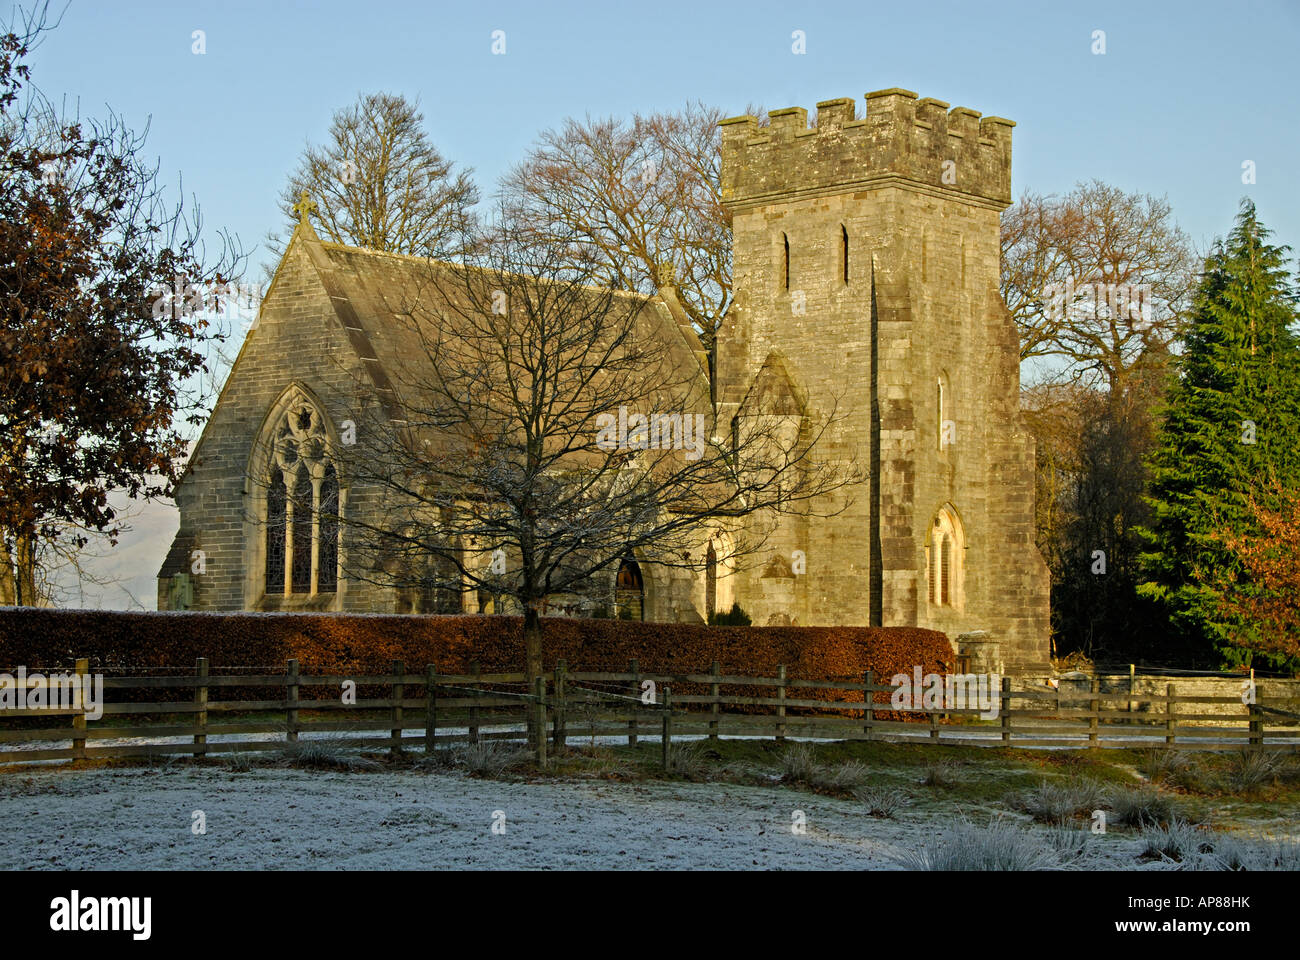 Church of Saint Margaret of Antioch, Low Wray. Lake District National Park, Cumbria, England, United Kingdom, Europe. Stock Photo